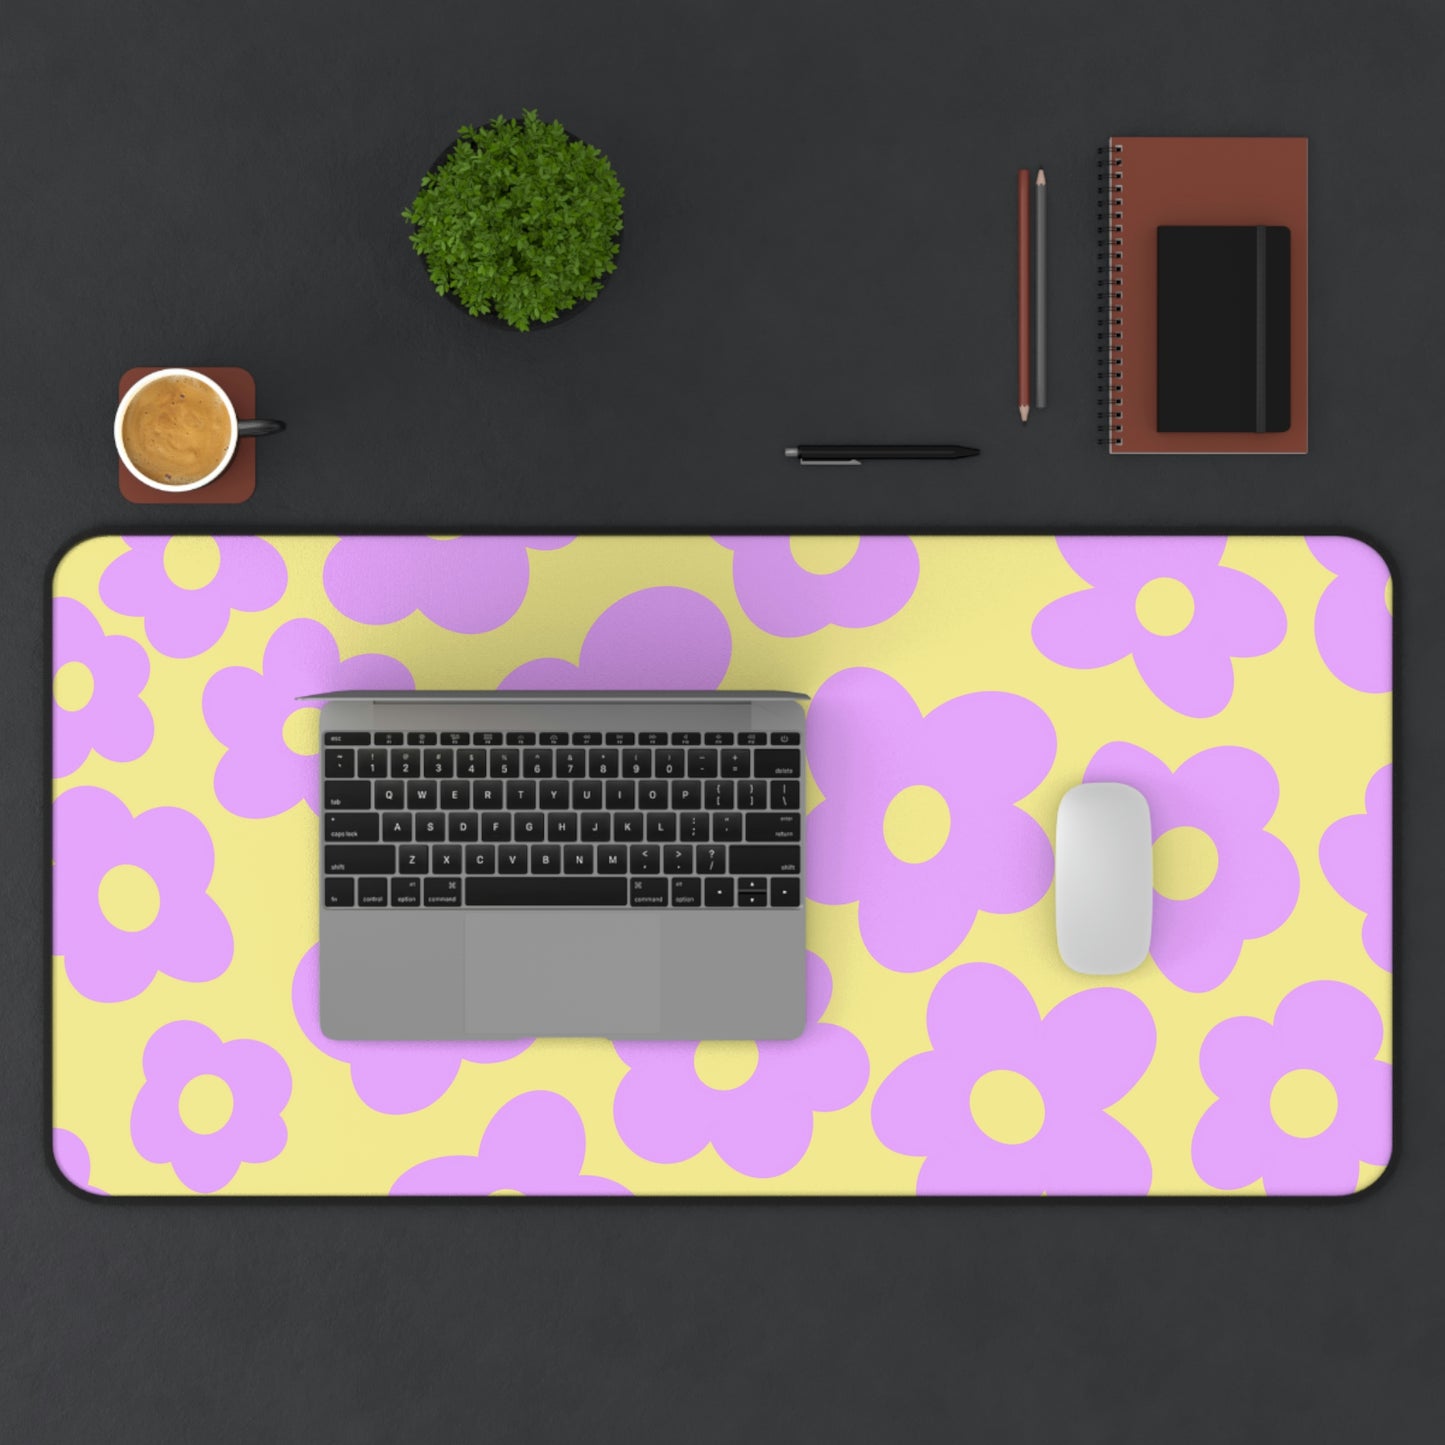 A 31" x 15.5" desk mat with purple flowers on a yellow background. A laptop and mouse sit on top of it.